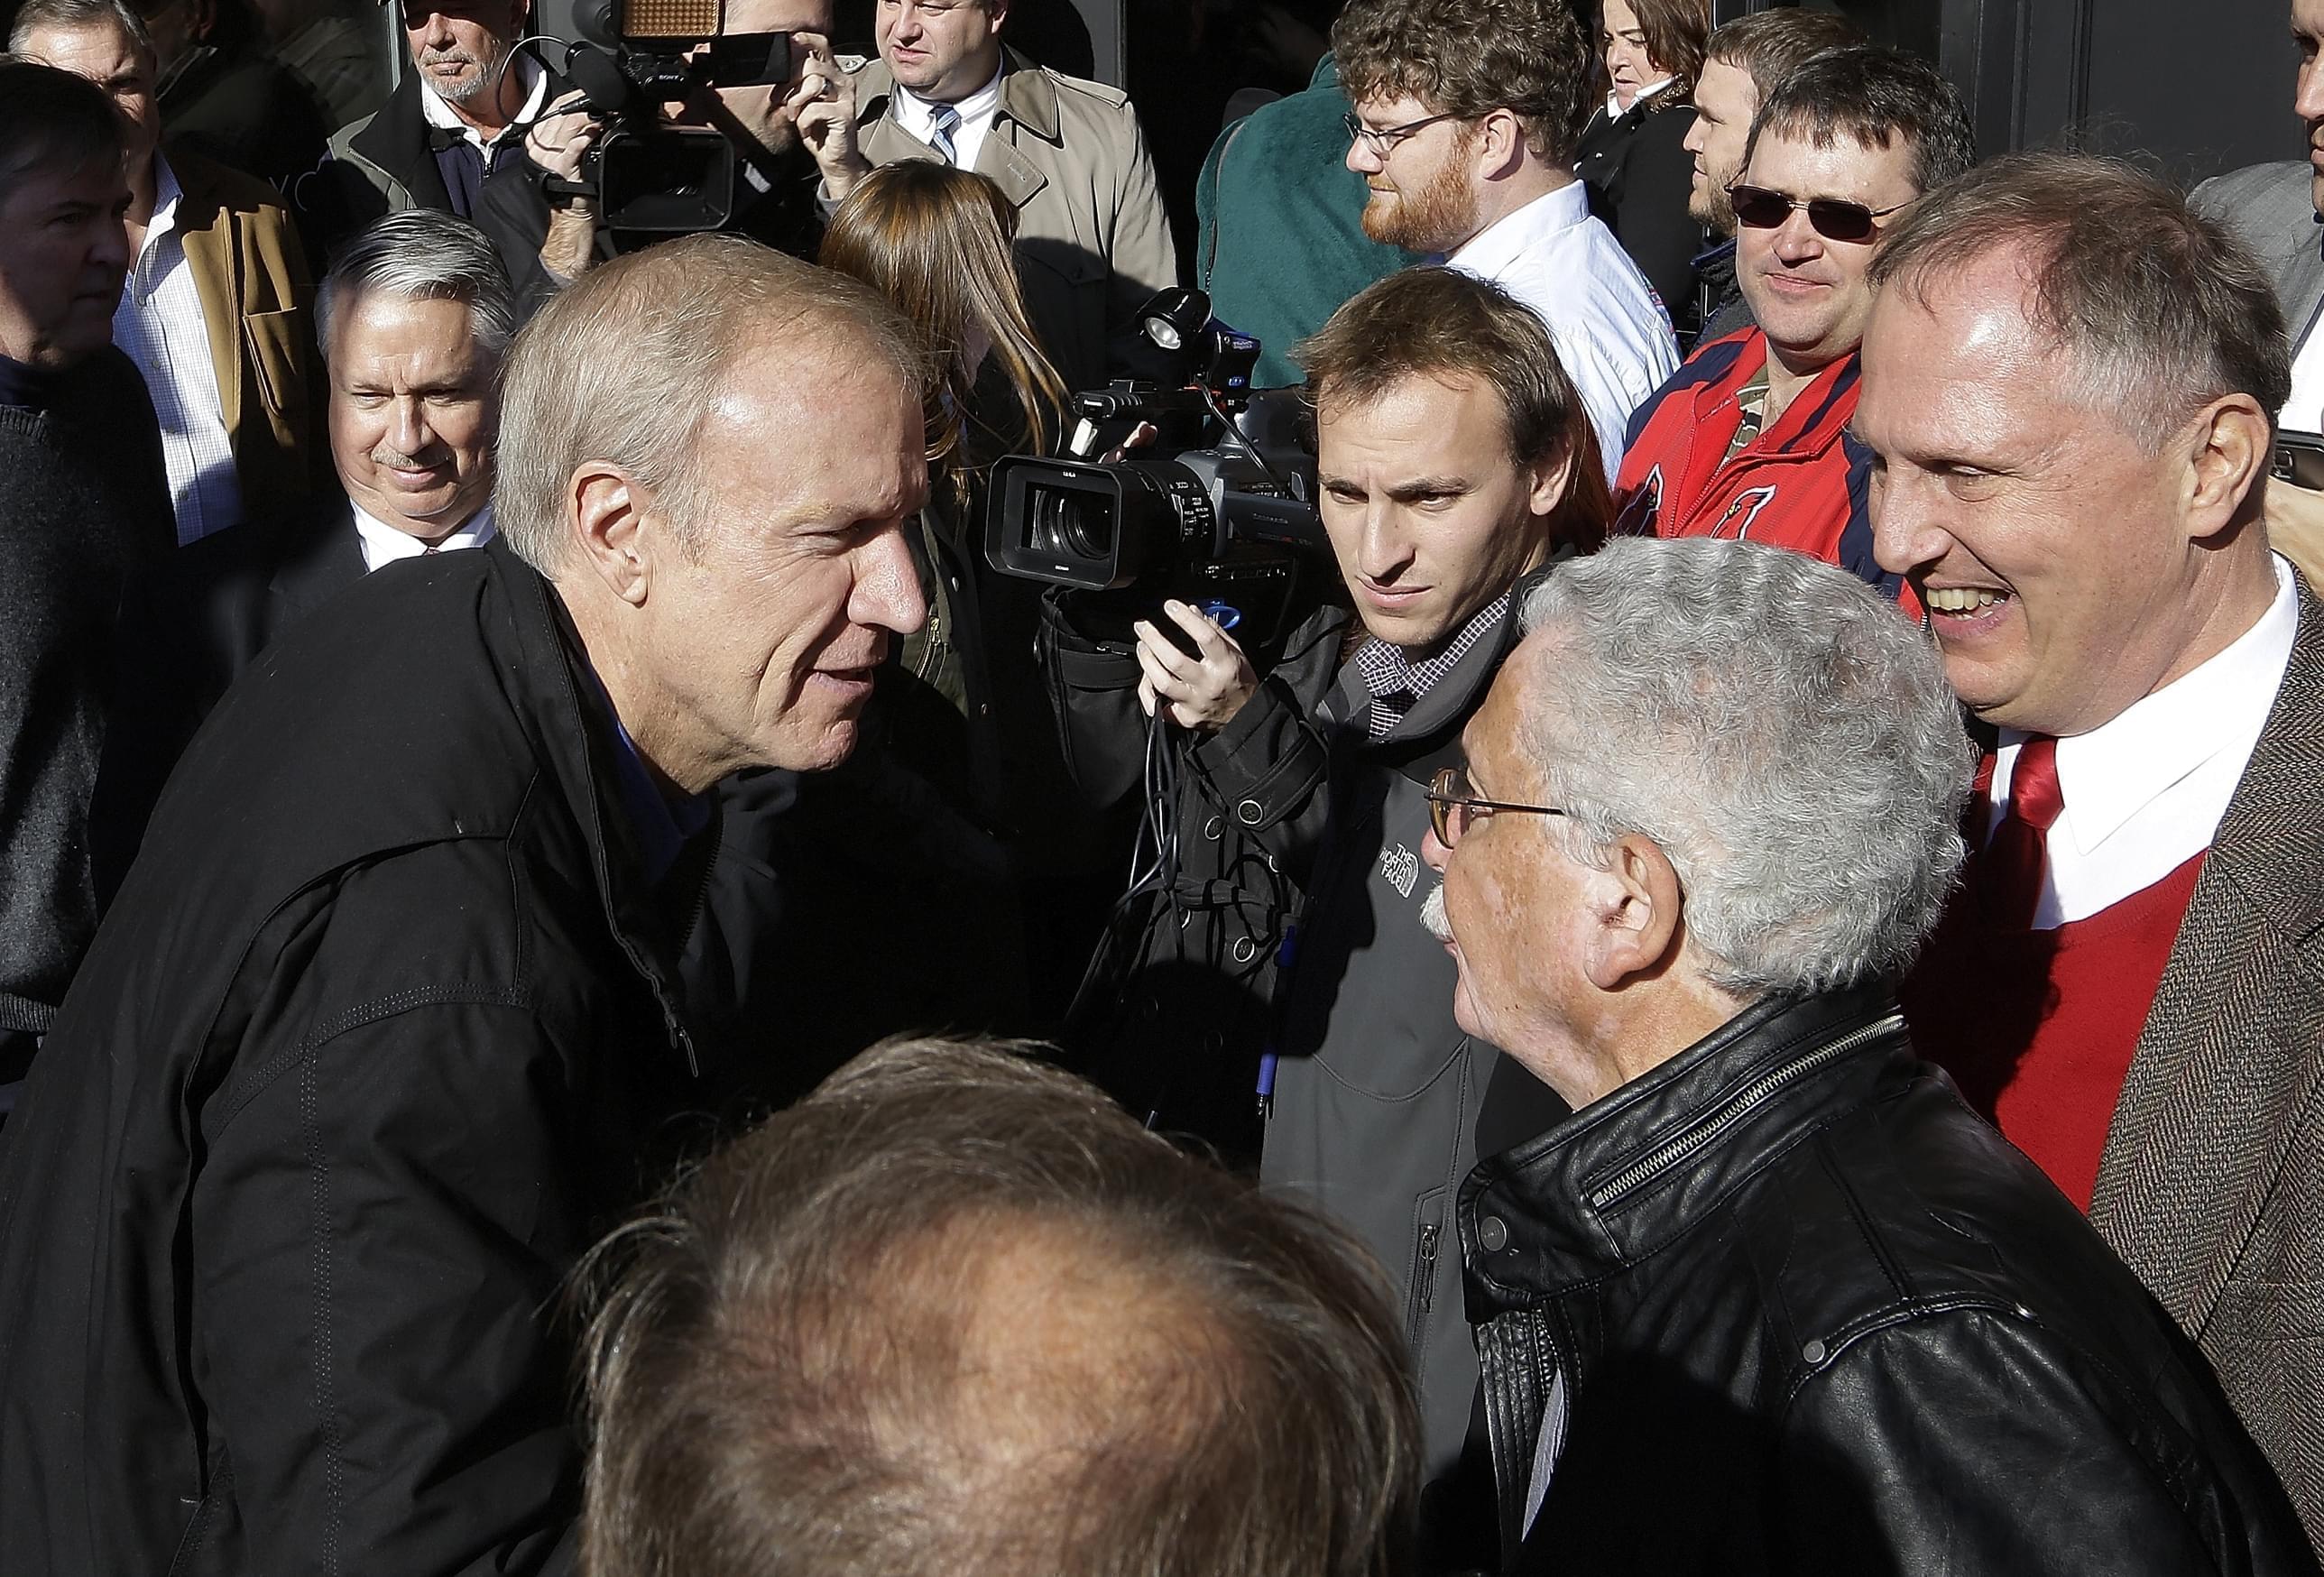 Gov.-elect Bruce Rauner greets supporters in Springfield, Ill.